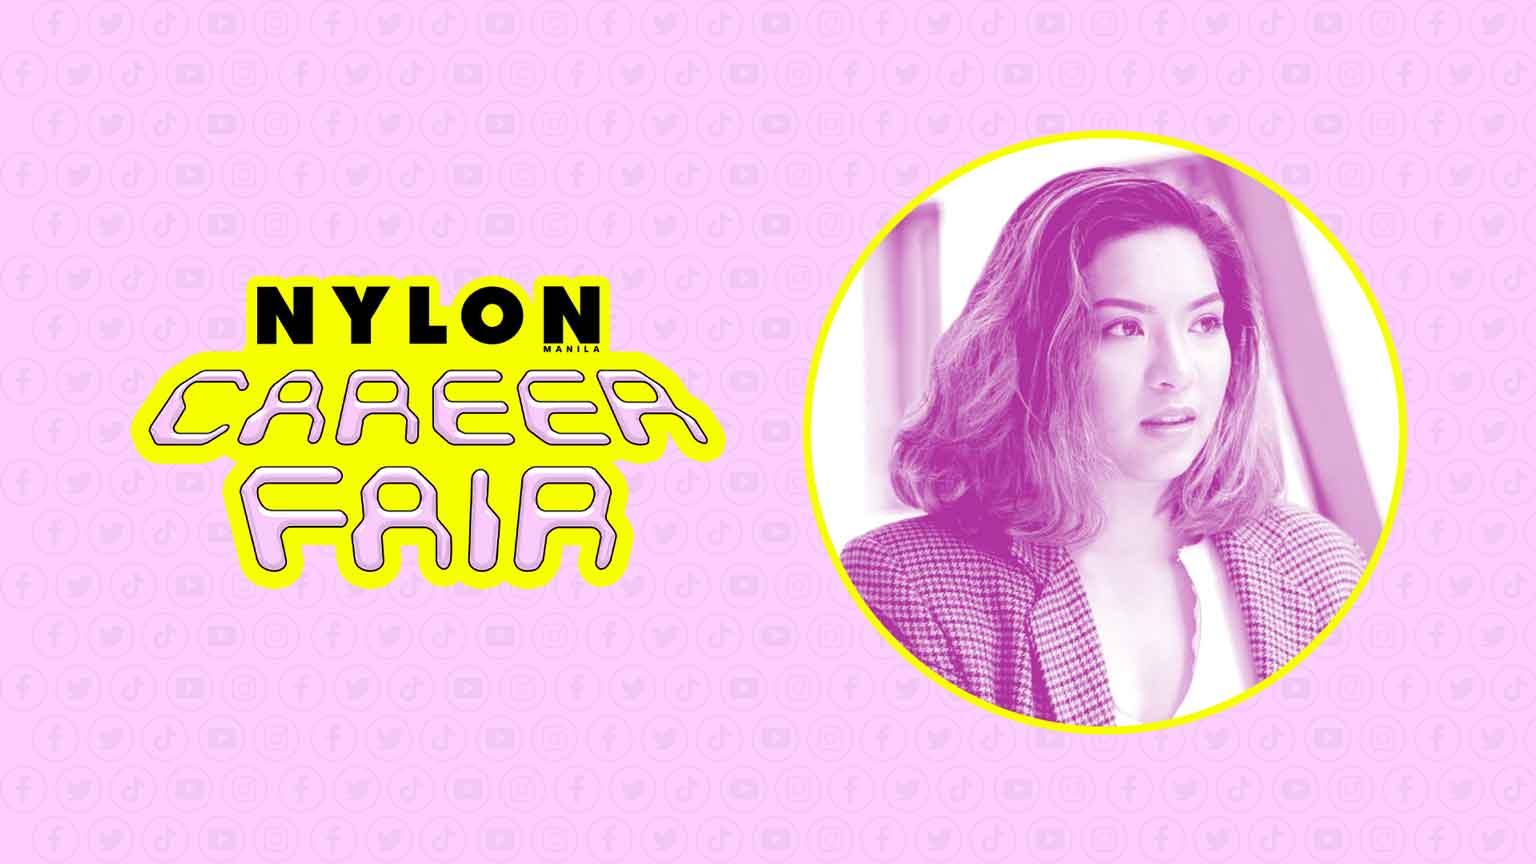 Learn How To Start A Successful Brand On Social Media In Sofia Quiogue’s workshop for NYLON Manila’s Career Fair